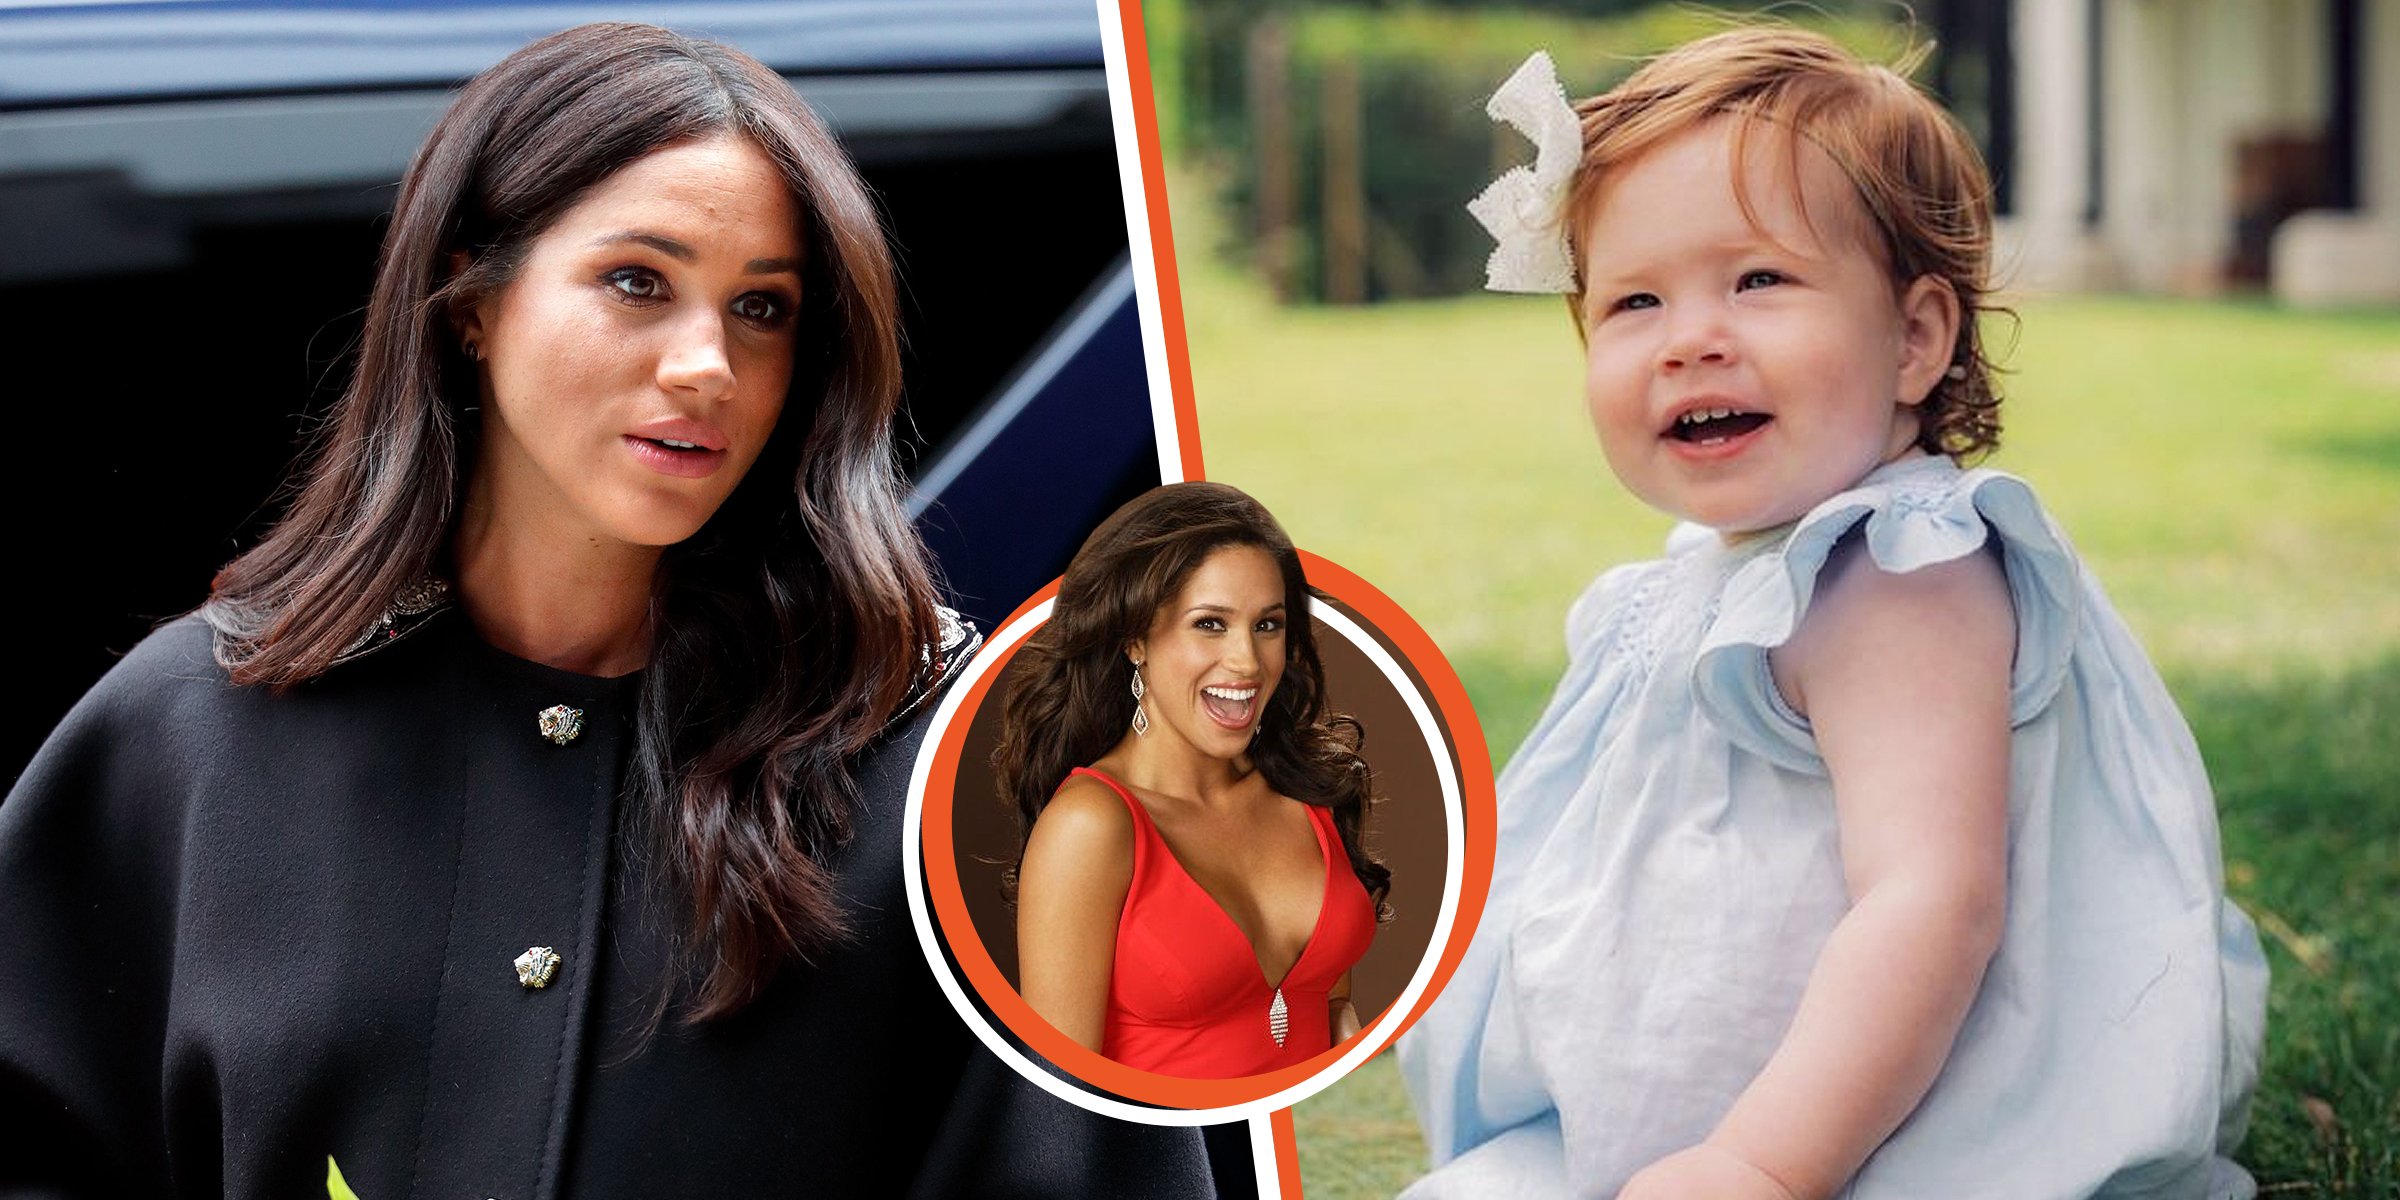 Meghan Markle ┃Lilibet Diana ┃ Source: Getty Images